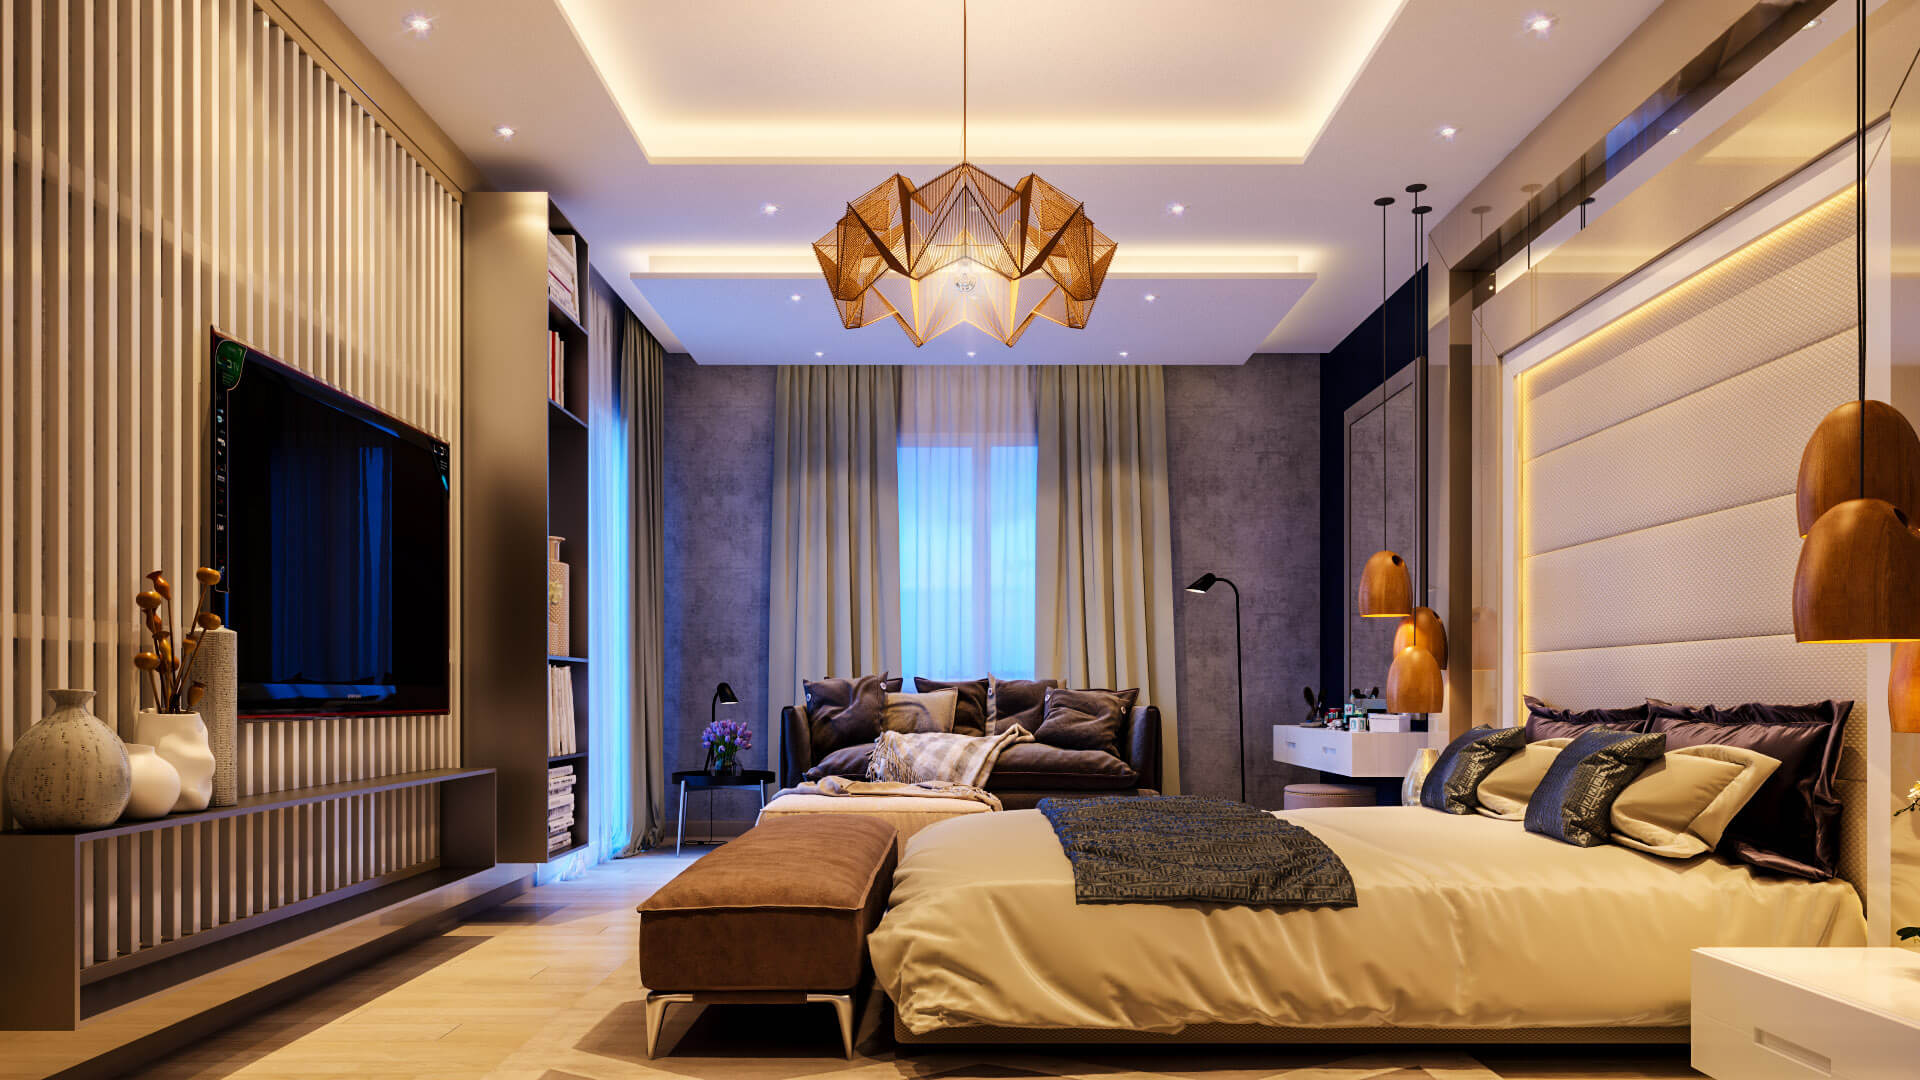 Luxurious Bedroom Decor Ideas You Fall In Love With – Crafted Beds Ltd